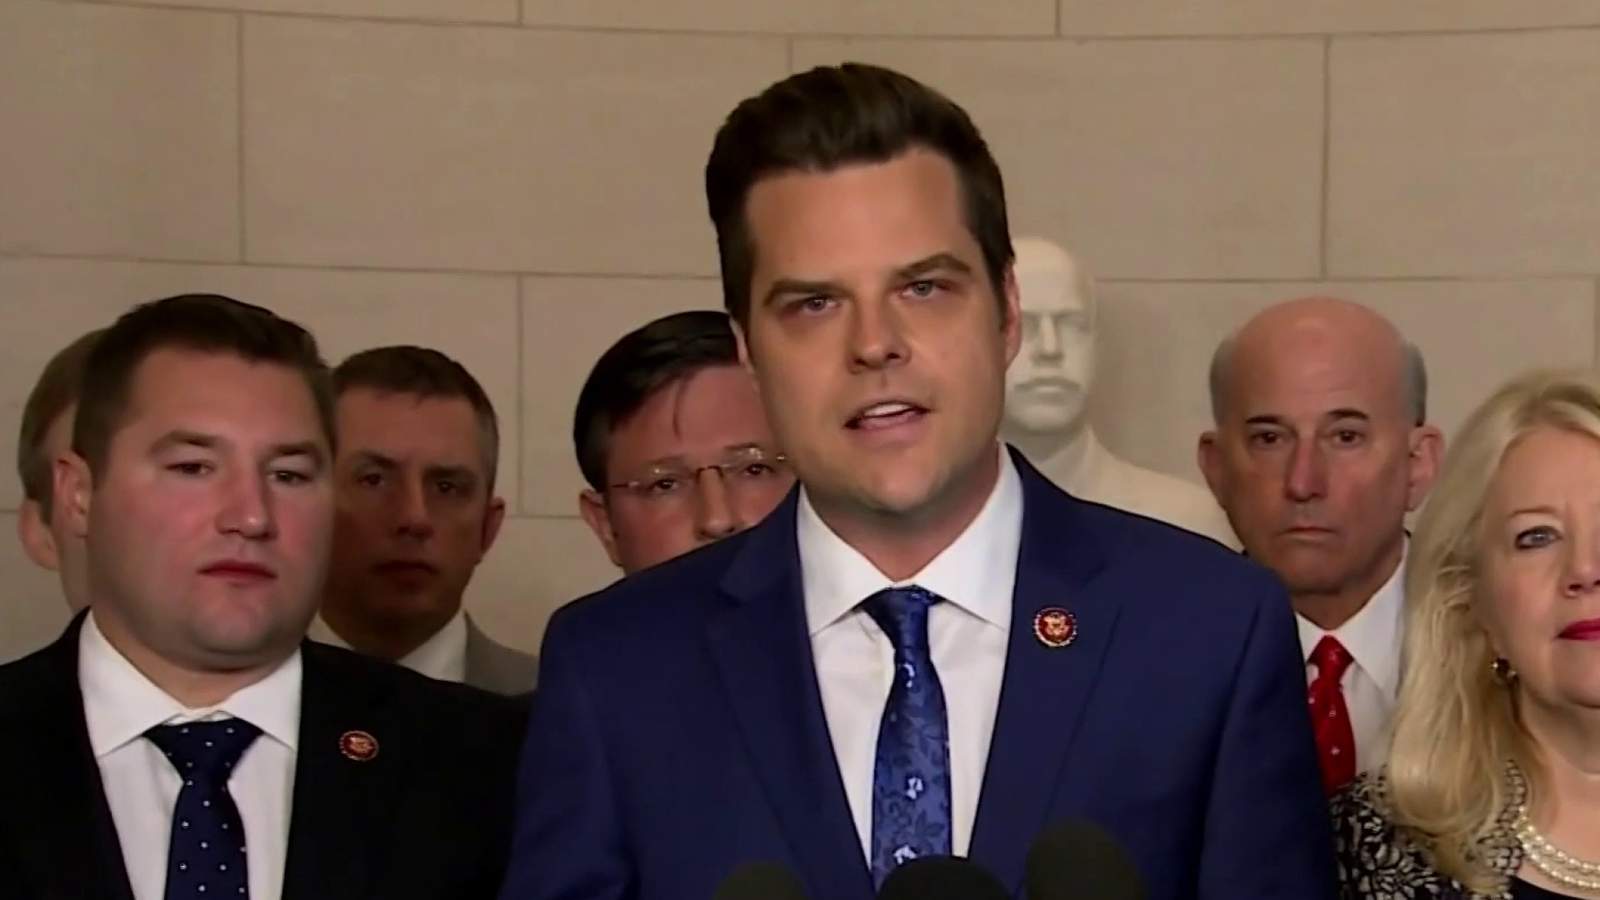 Rep. Matt Gaetz faces probe by House ethics over potential misconduct